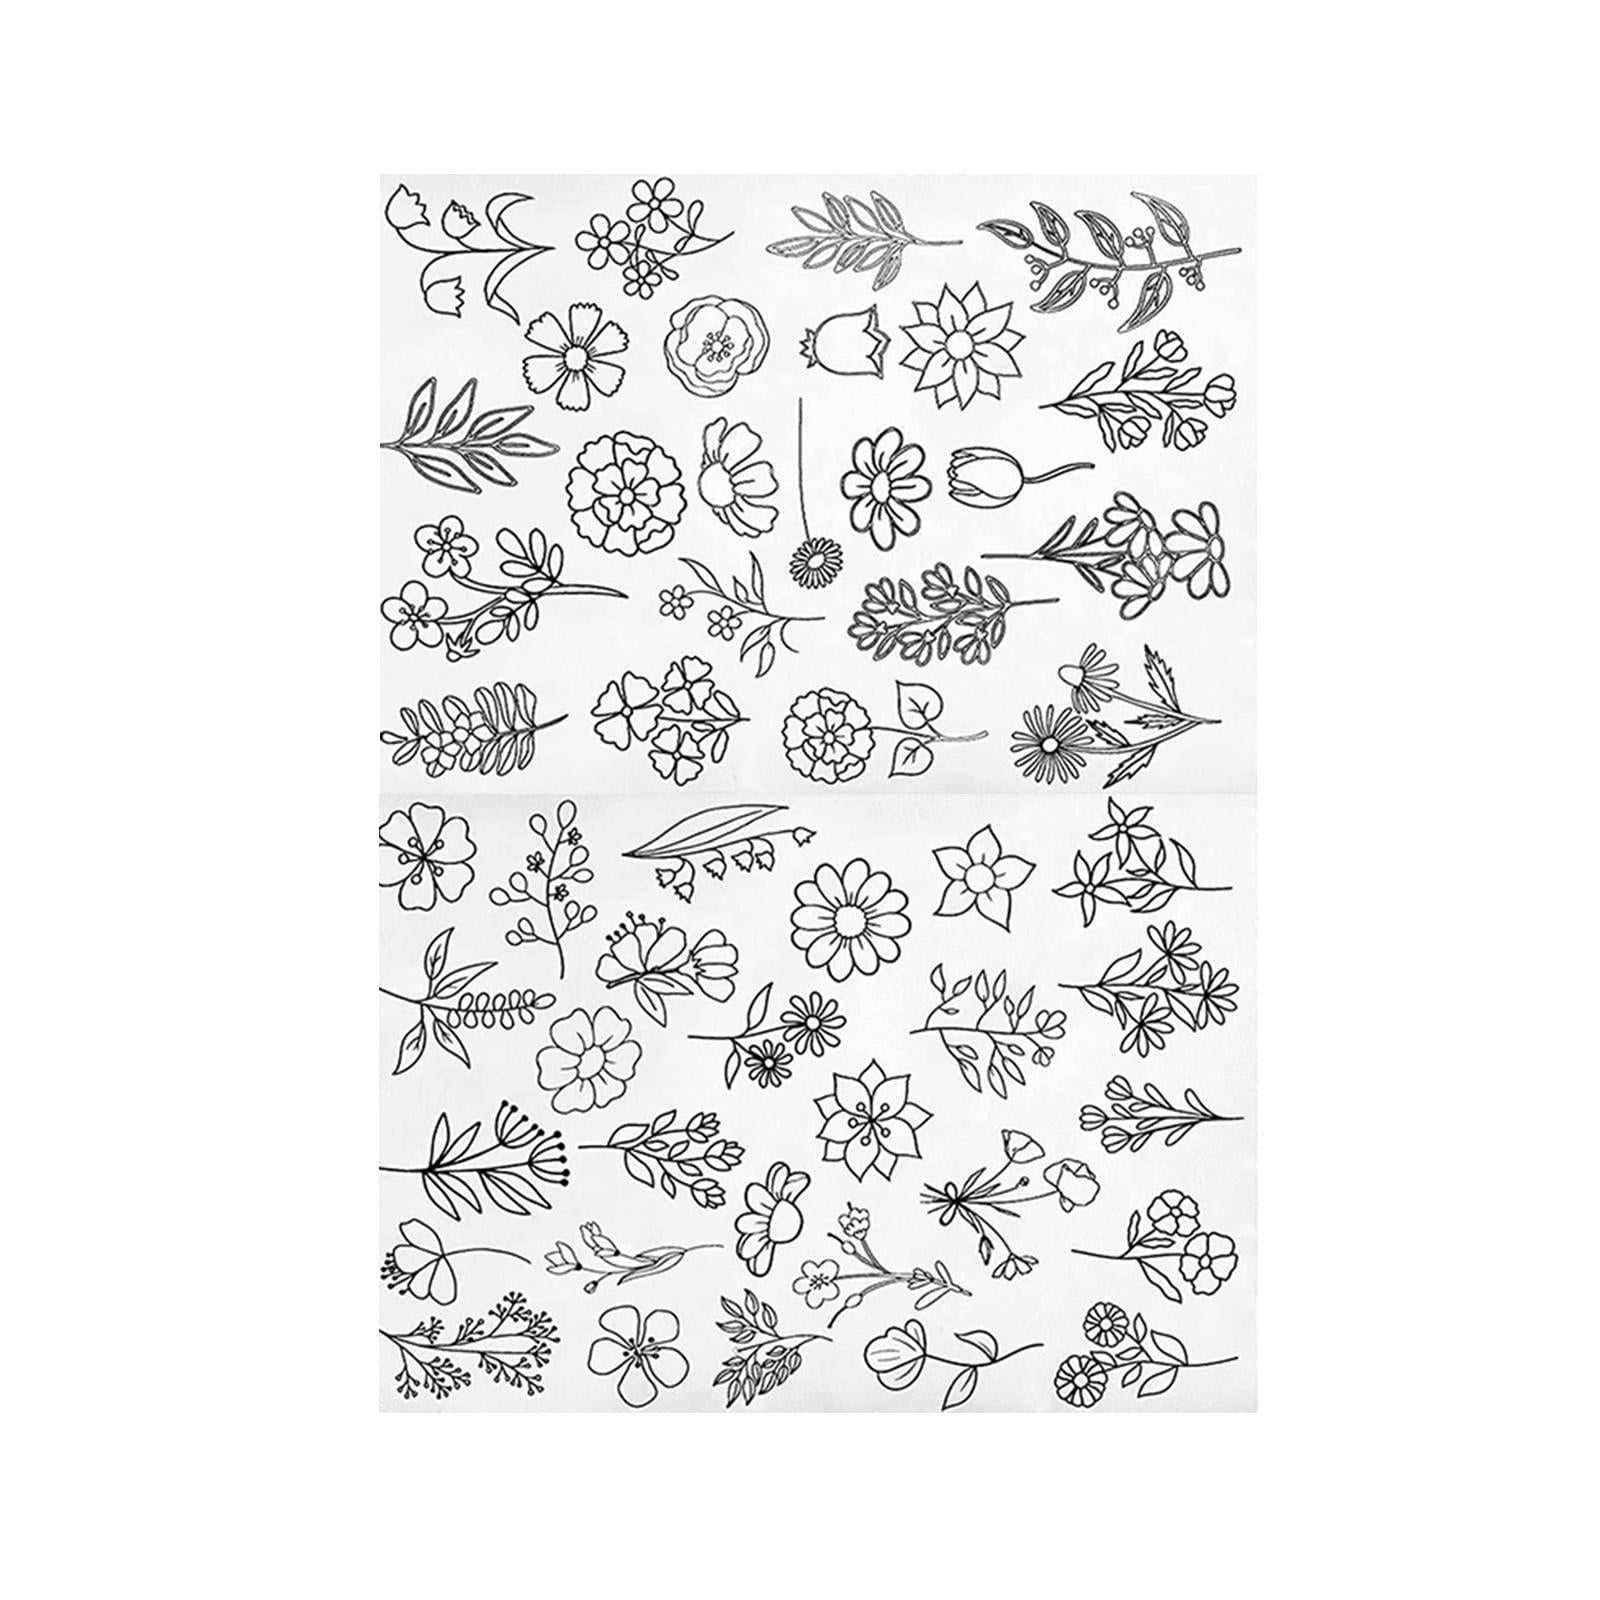 Water Soluble Stabilizer Water Soluble Fabric with Flower Patterns